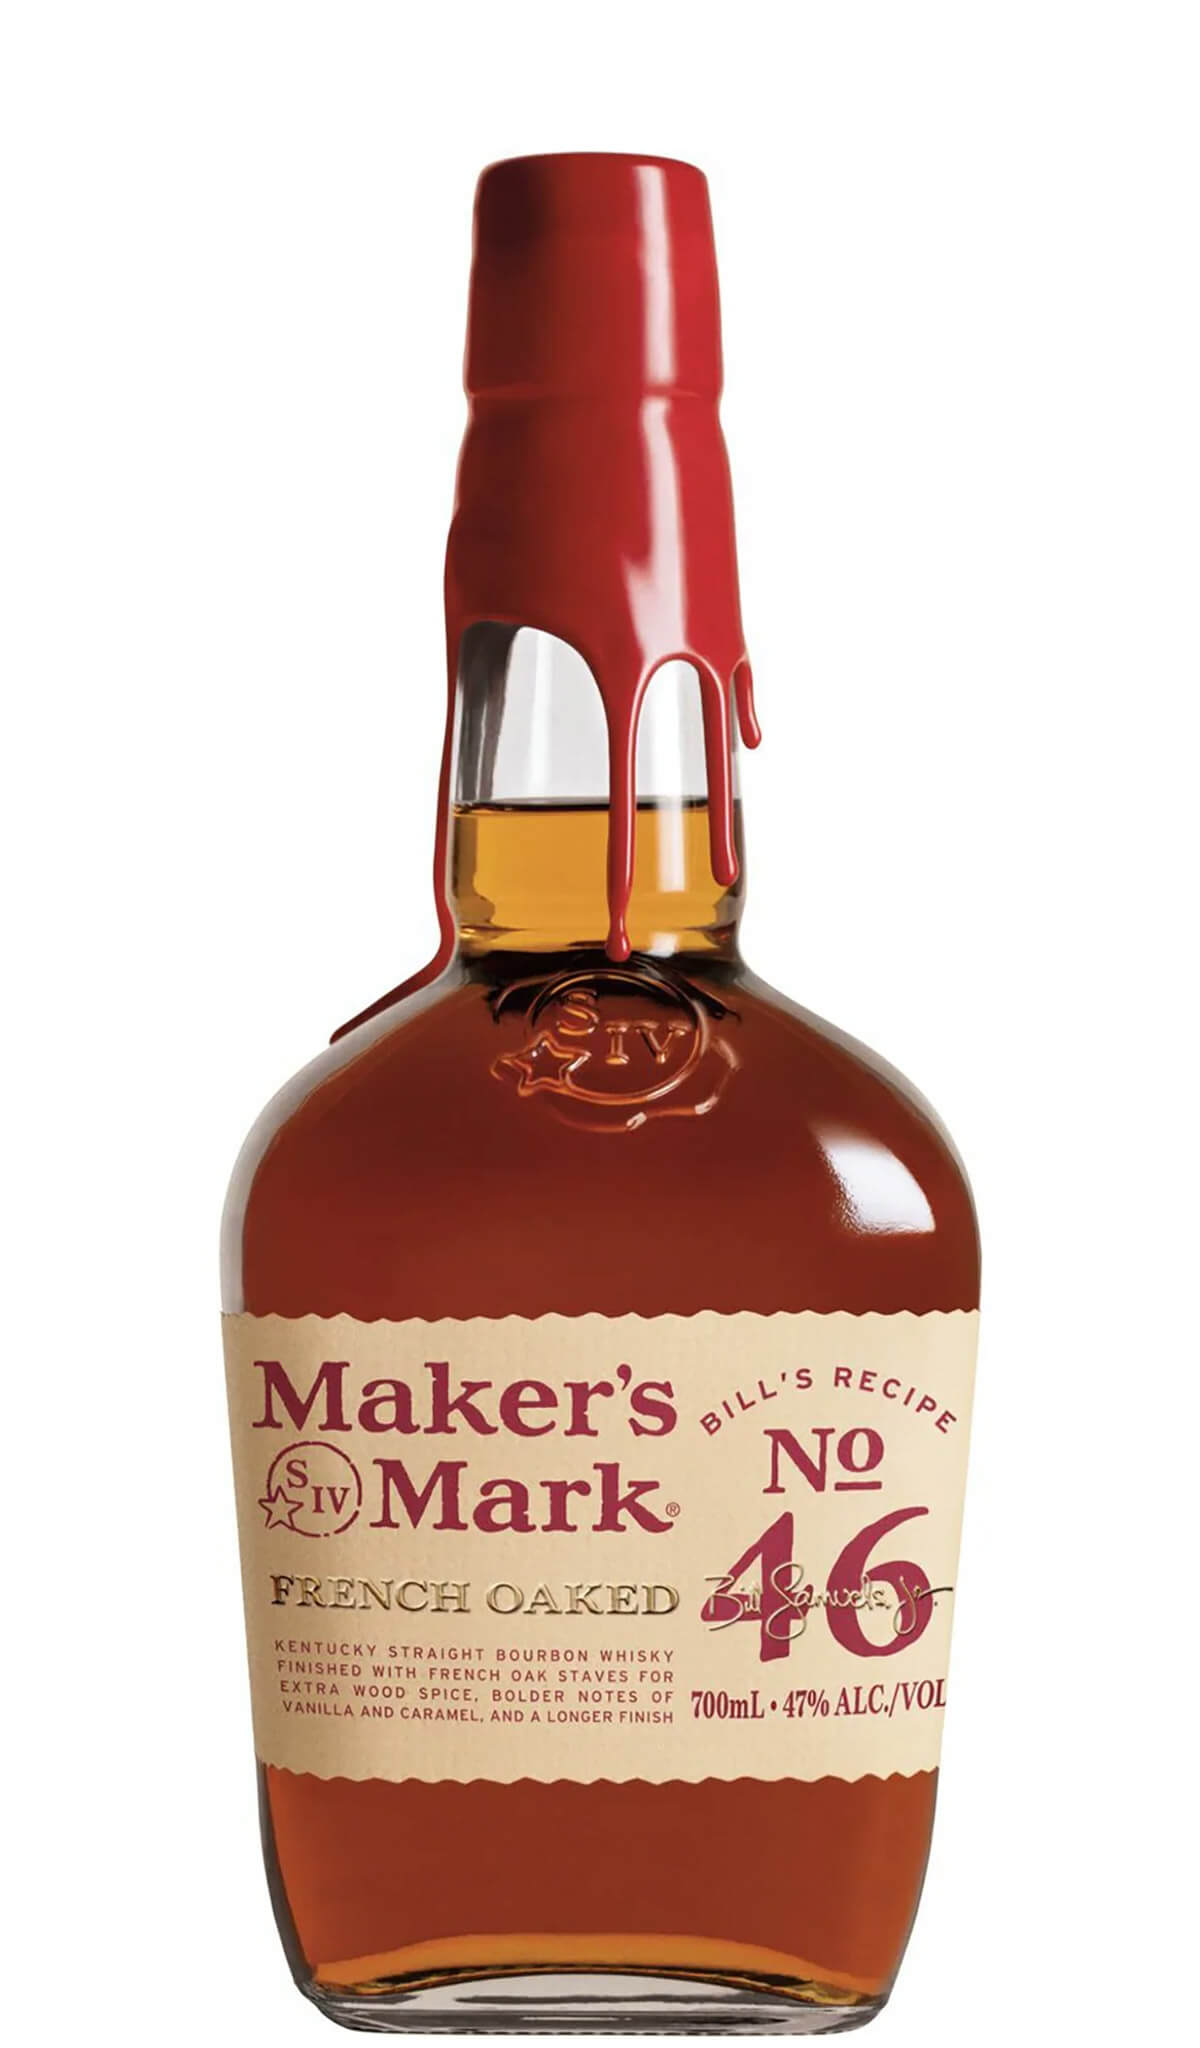 Find out more or buy Maker’s Mark 46 Kentucky Straight Bourbon 700ml online at Wine Sellers Direct - Australia’s independent liquor specialists.